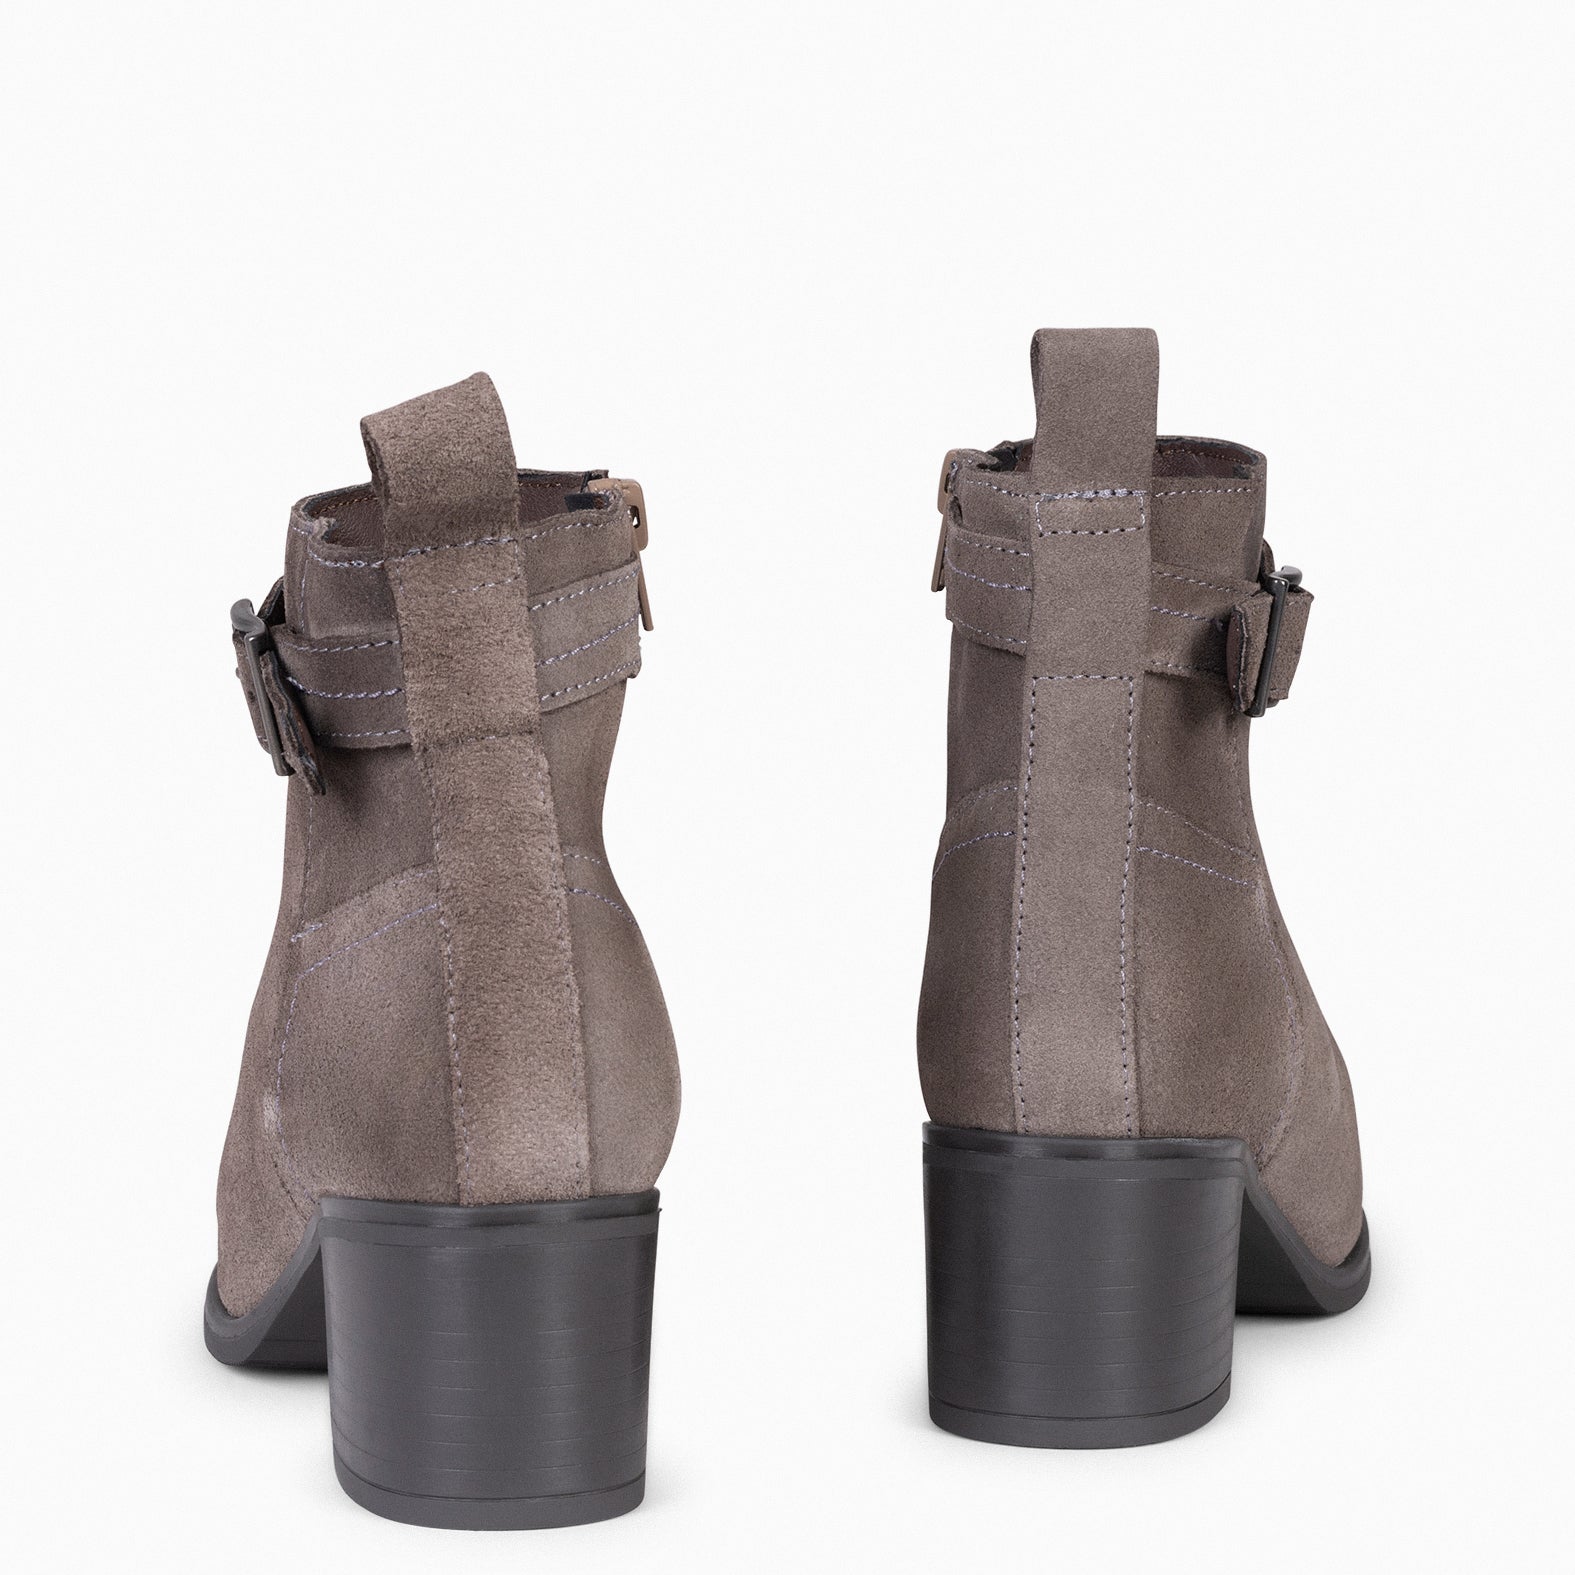 SEATTLE - TAUPE Women suede leather booties 